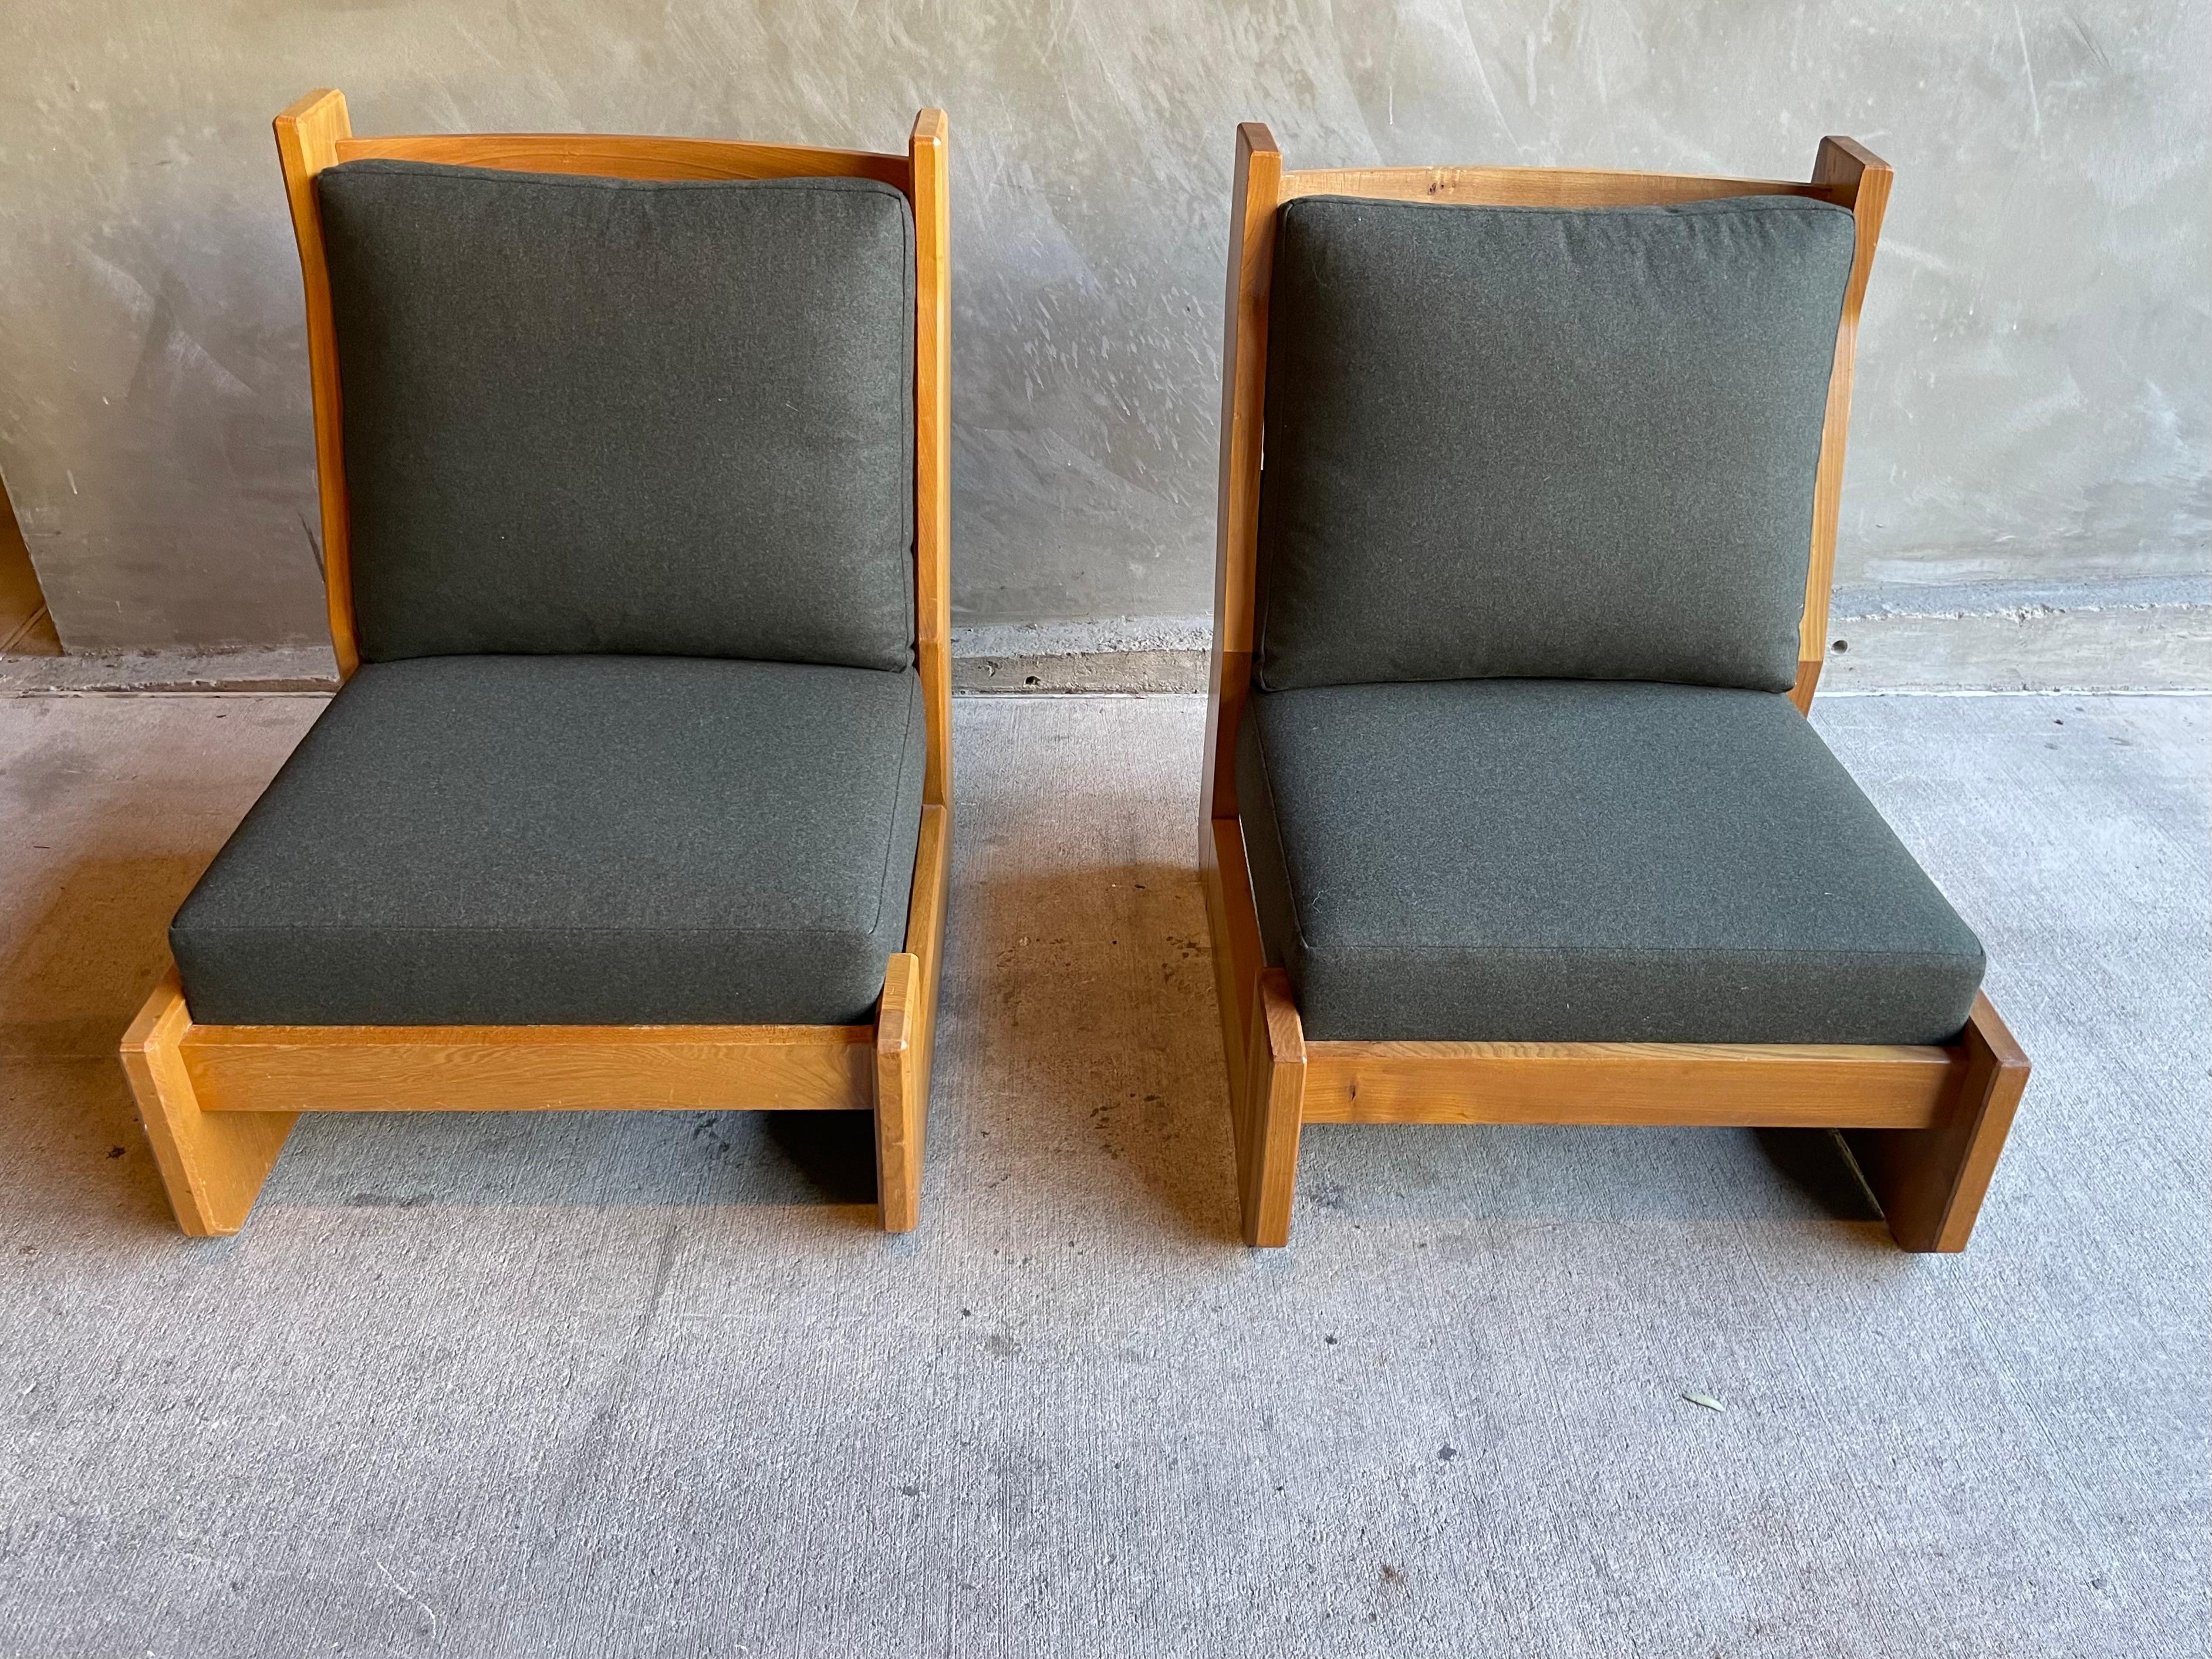 Pair armless lounge chairs by collectible maker, Maison Regain, with solid elm frames. Notice the handsome slatted backs. Newly upholstered with foam and down cushions in luxurious Chiavasso wool fabric. Color is a dark grayish green. Very